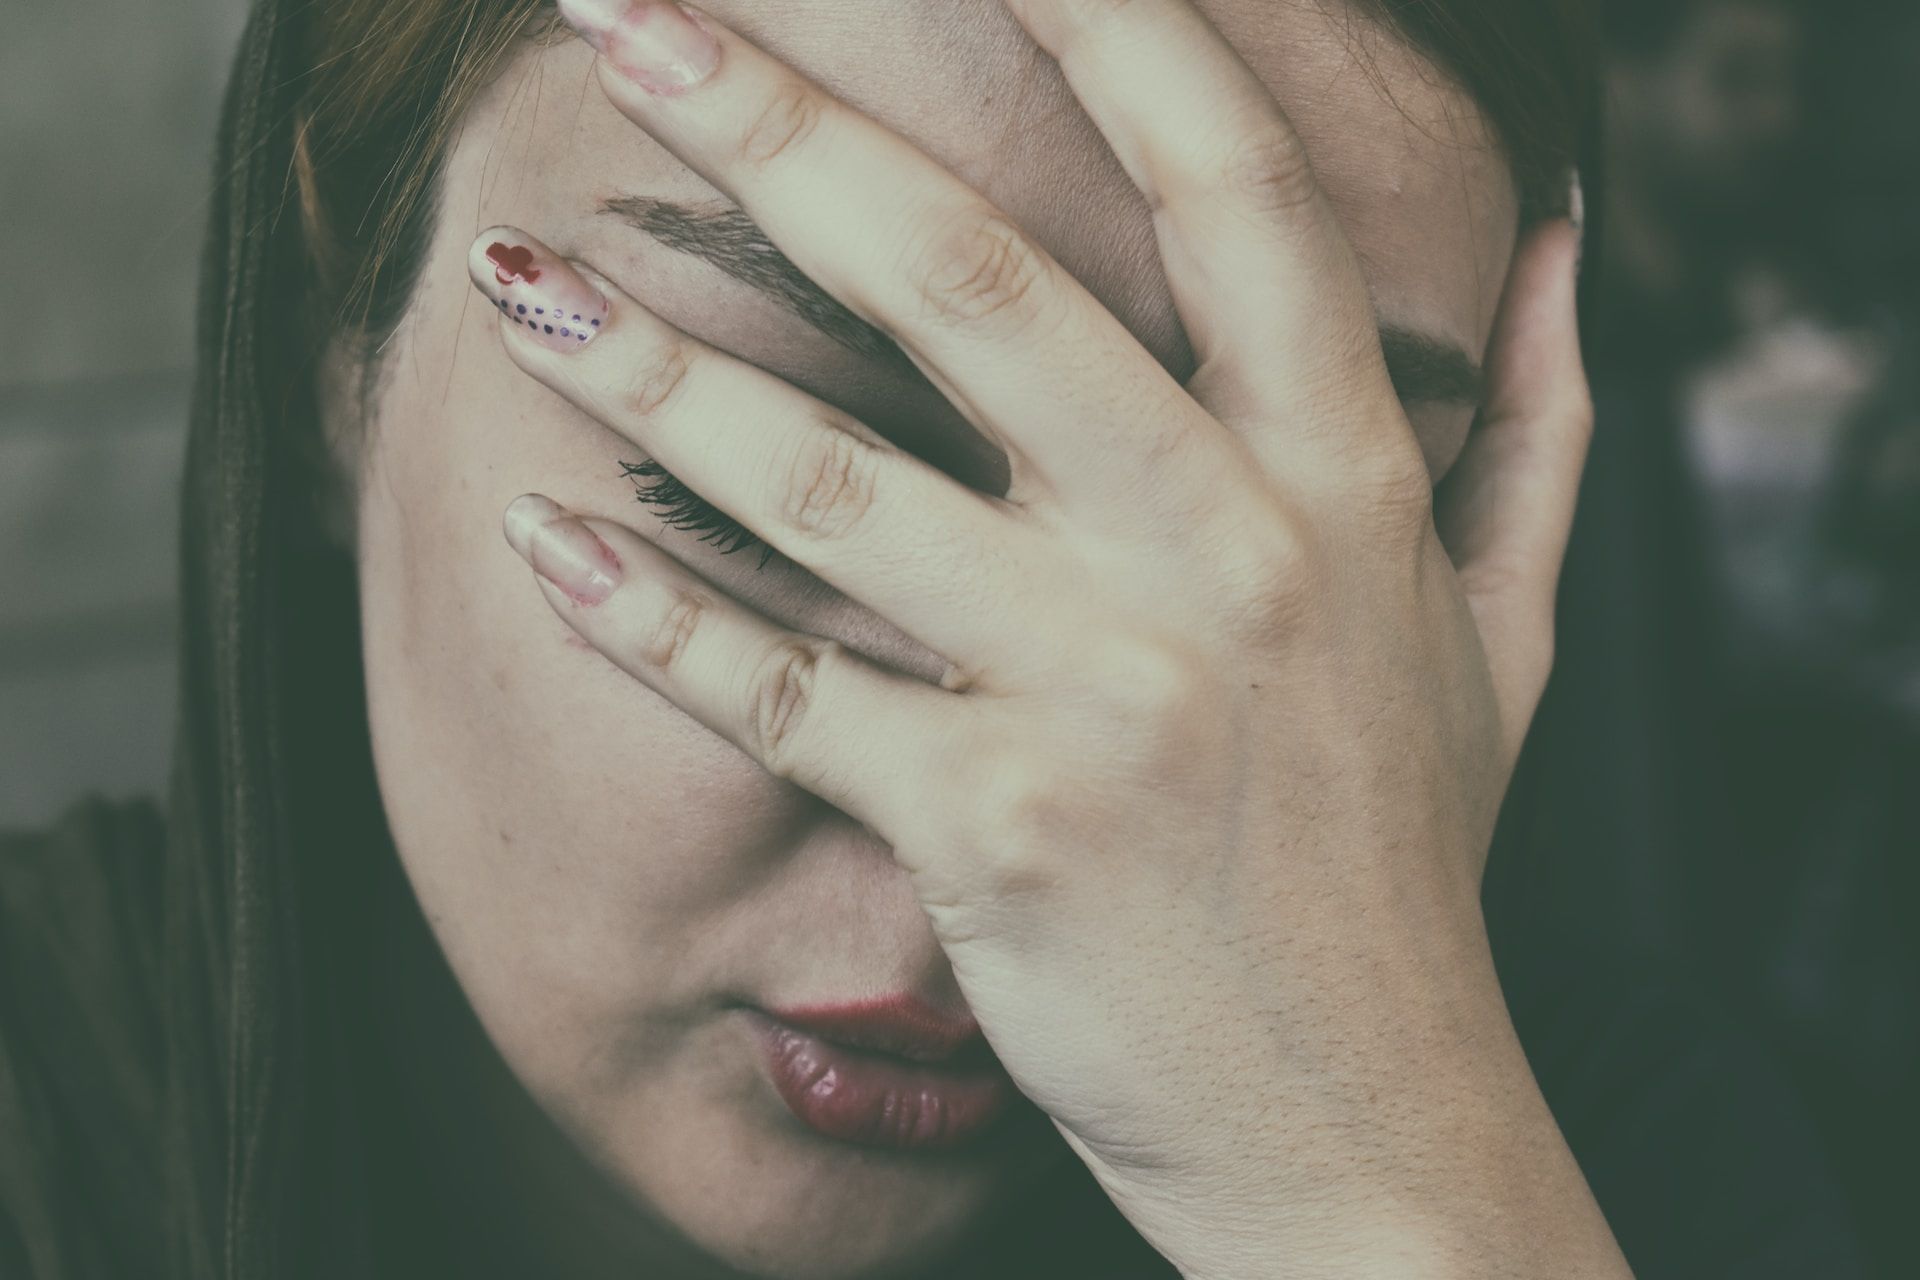 woman feeling pain while covering face with hand